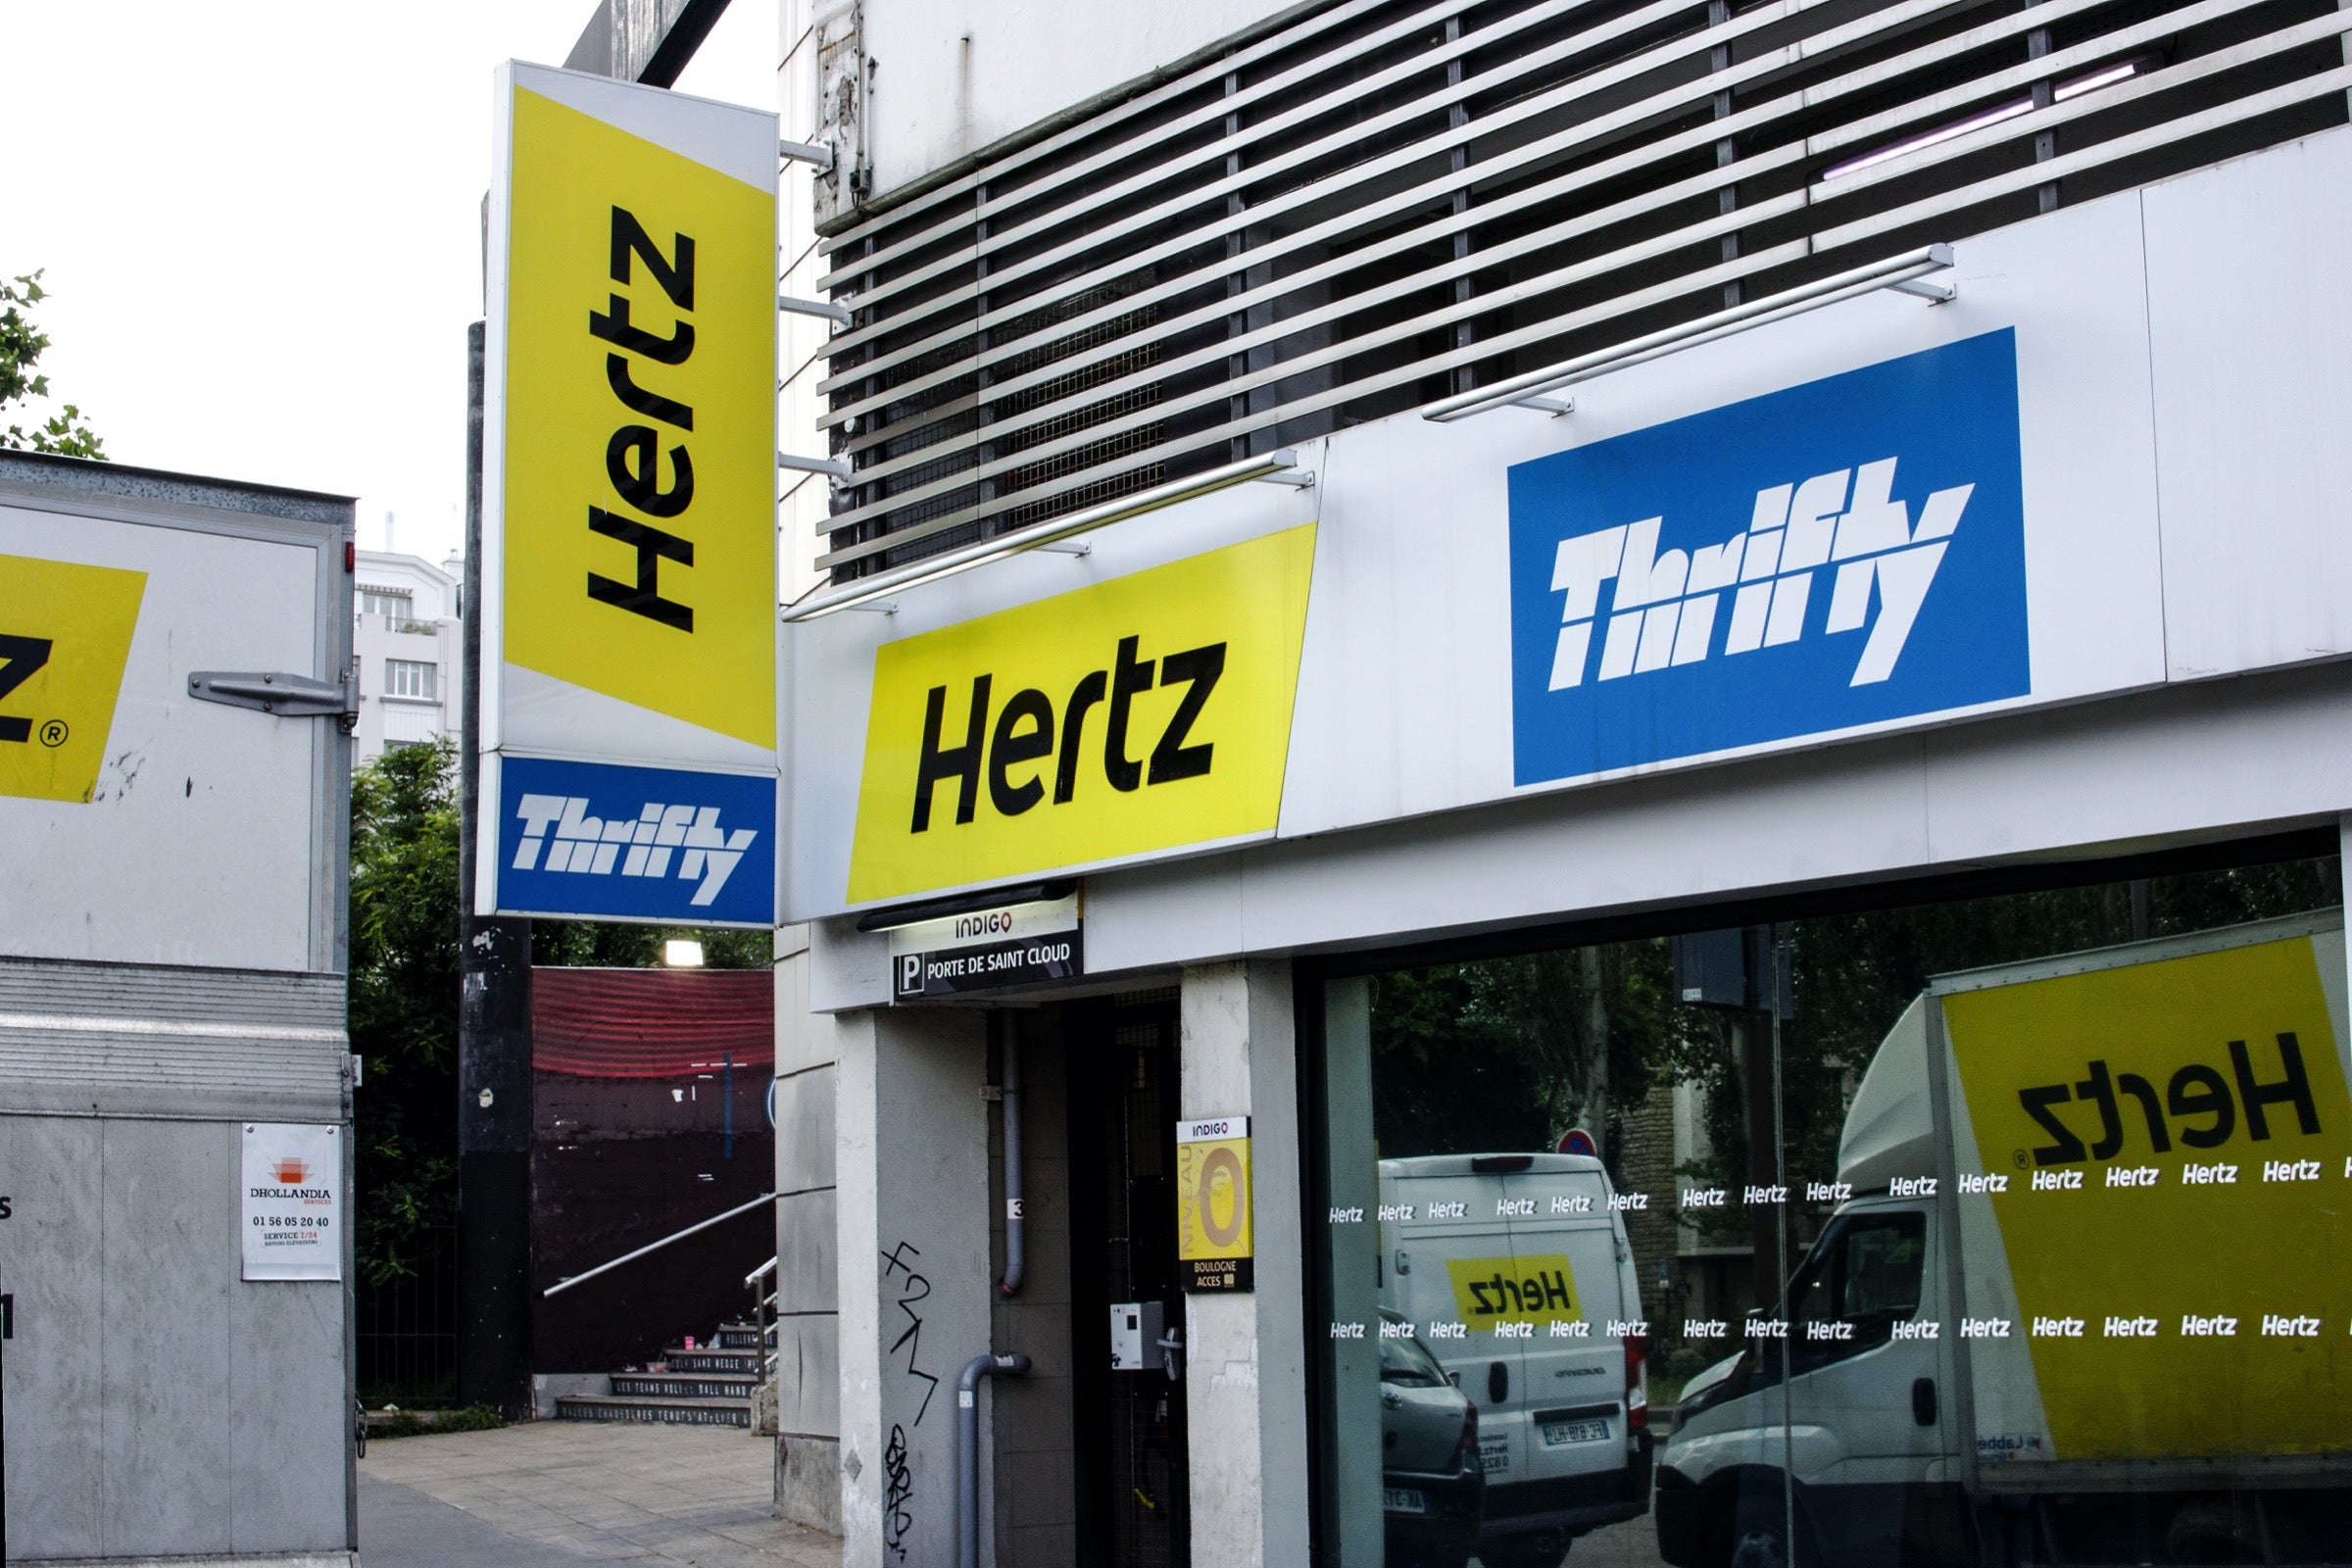 Hertz and Thrifty location in France